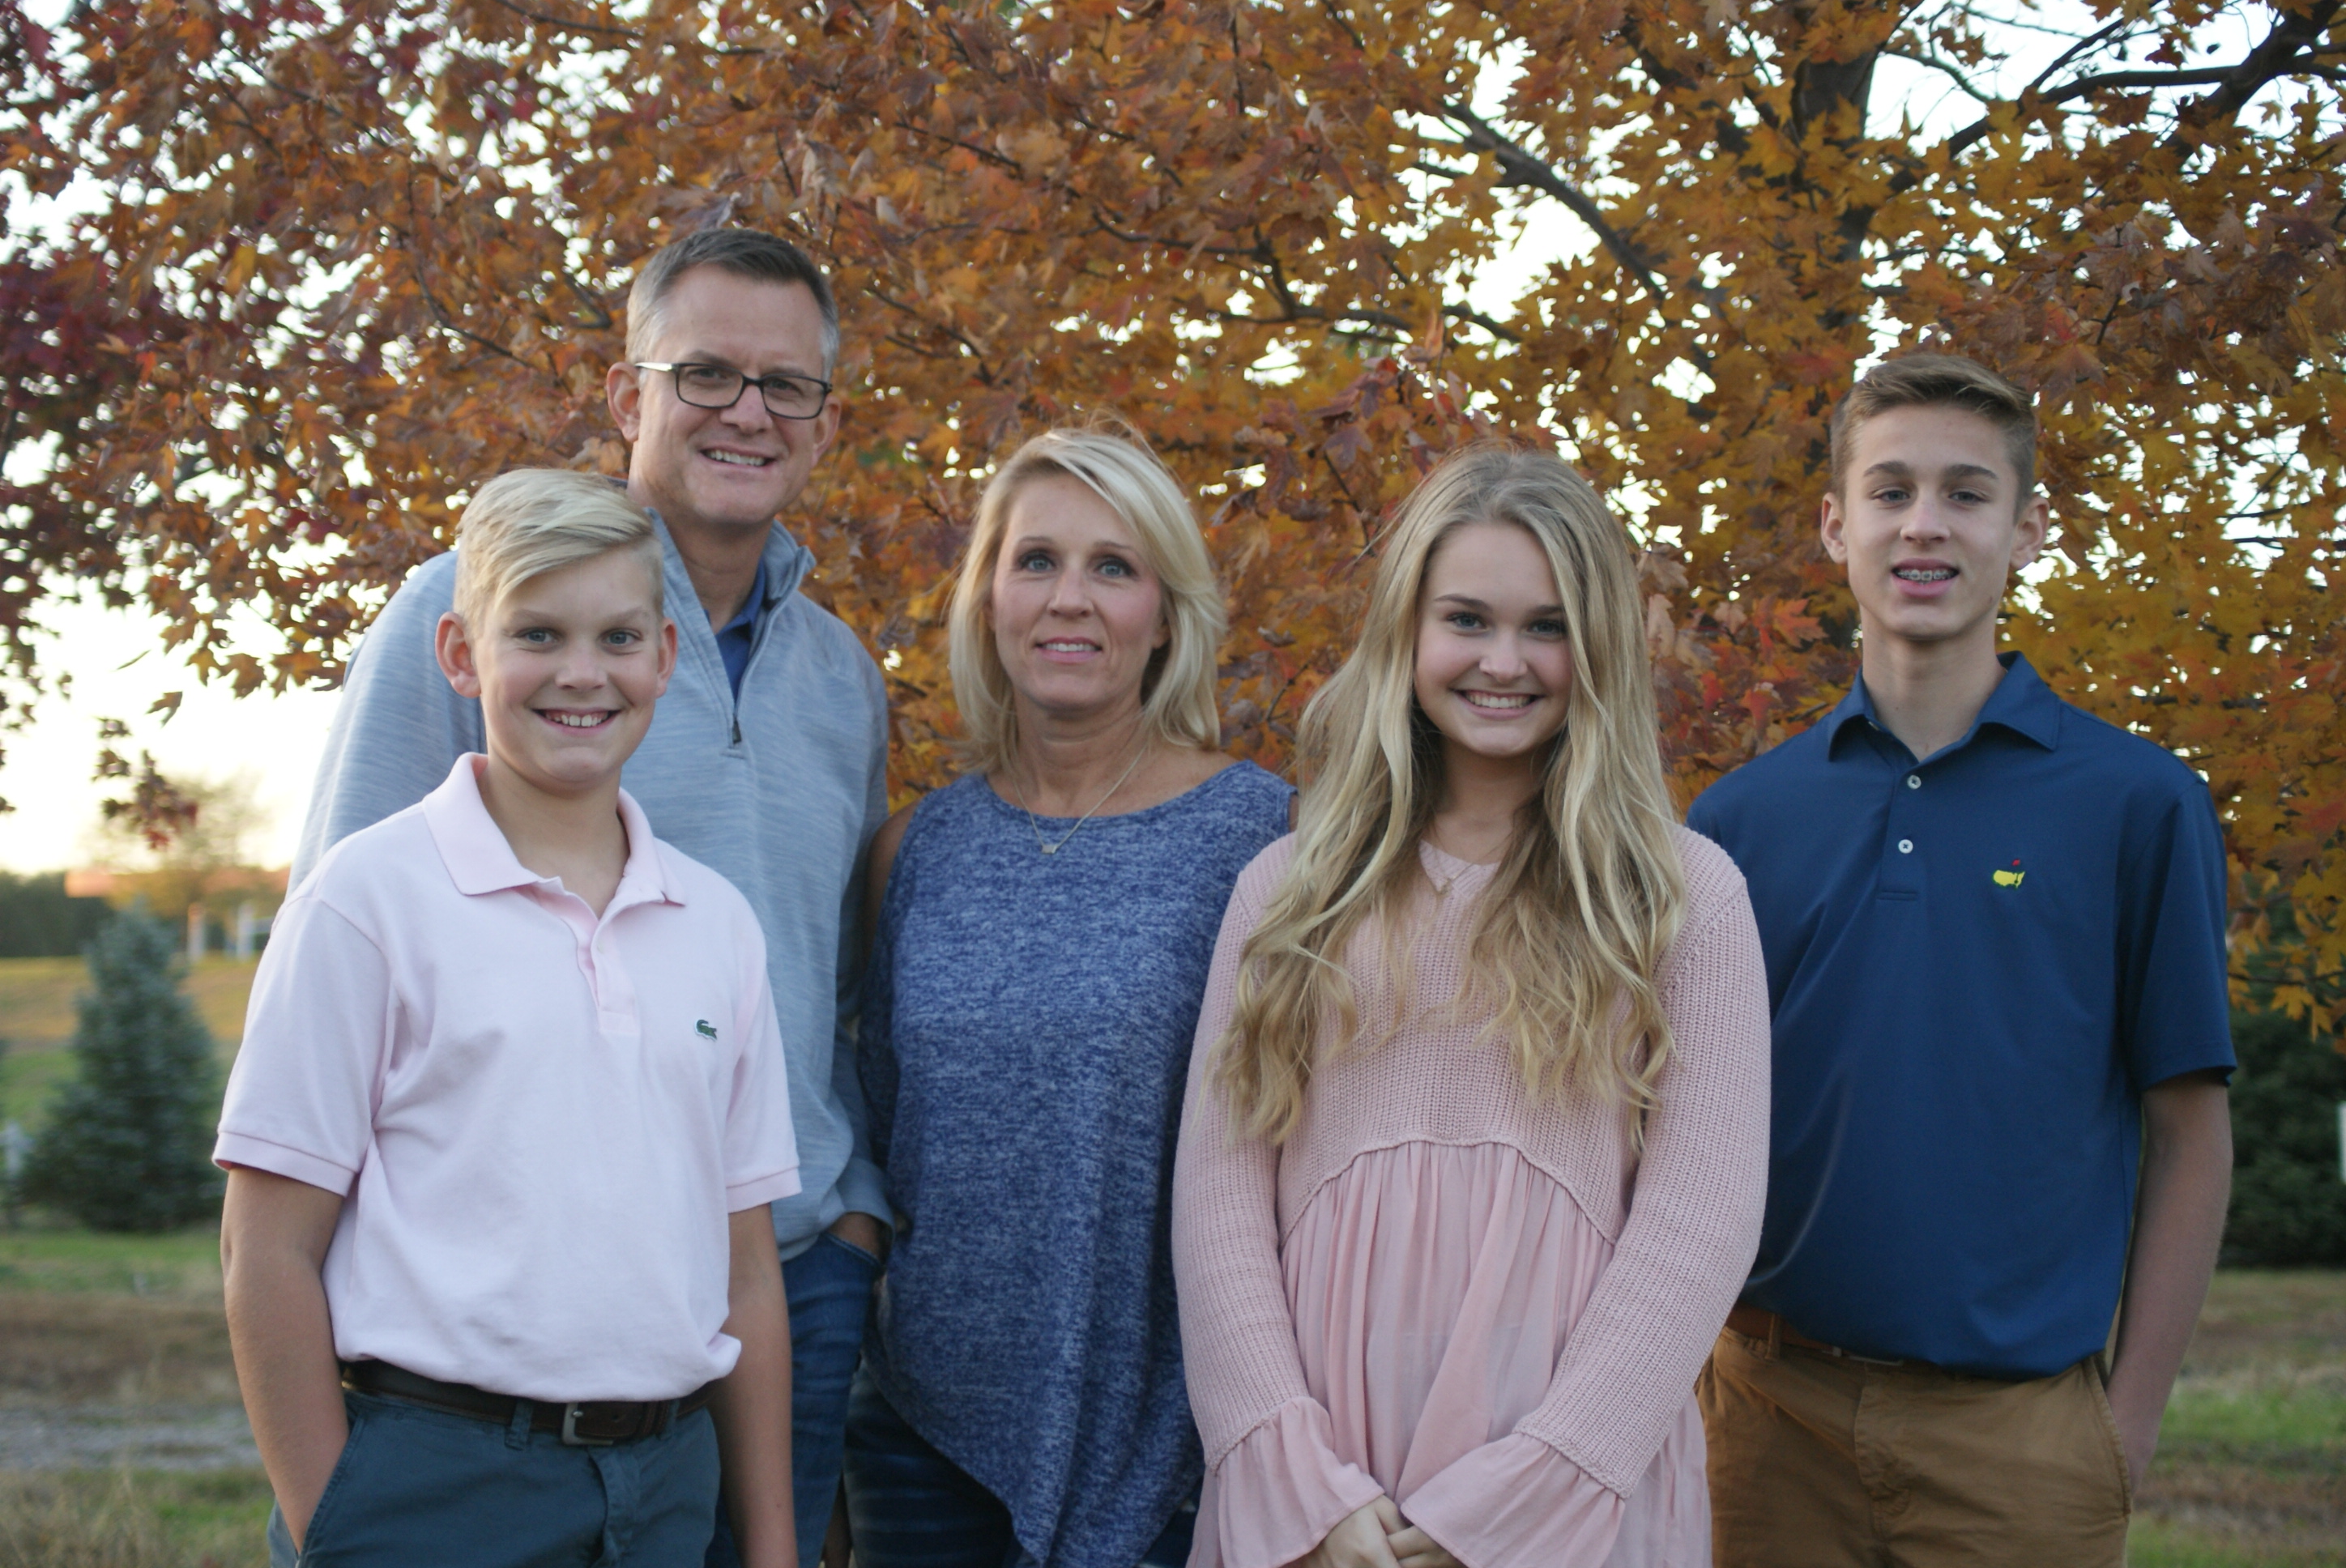 Tom Everett and Family from left to right include Davis, Tom, Cody, Ellen, and Jack